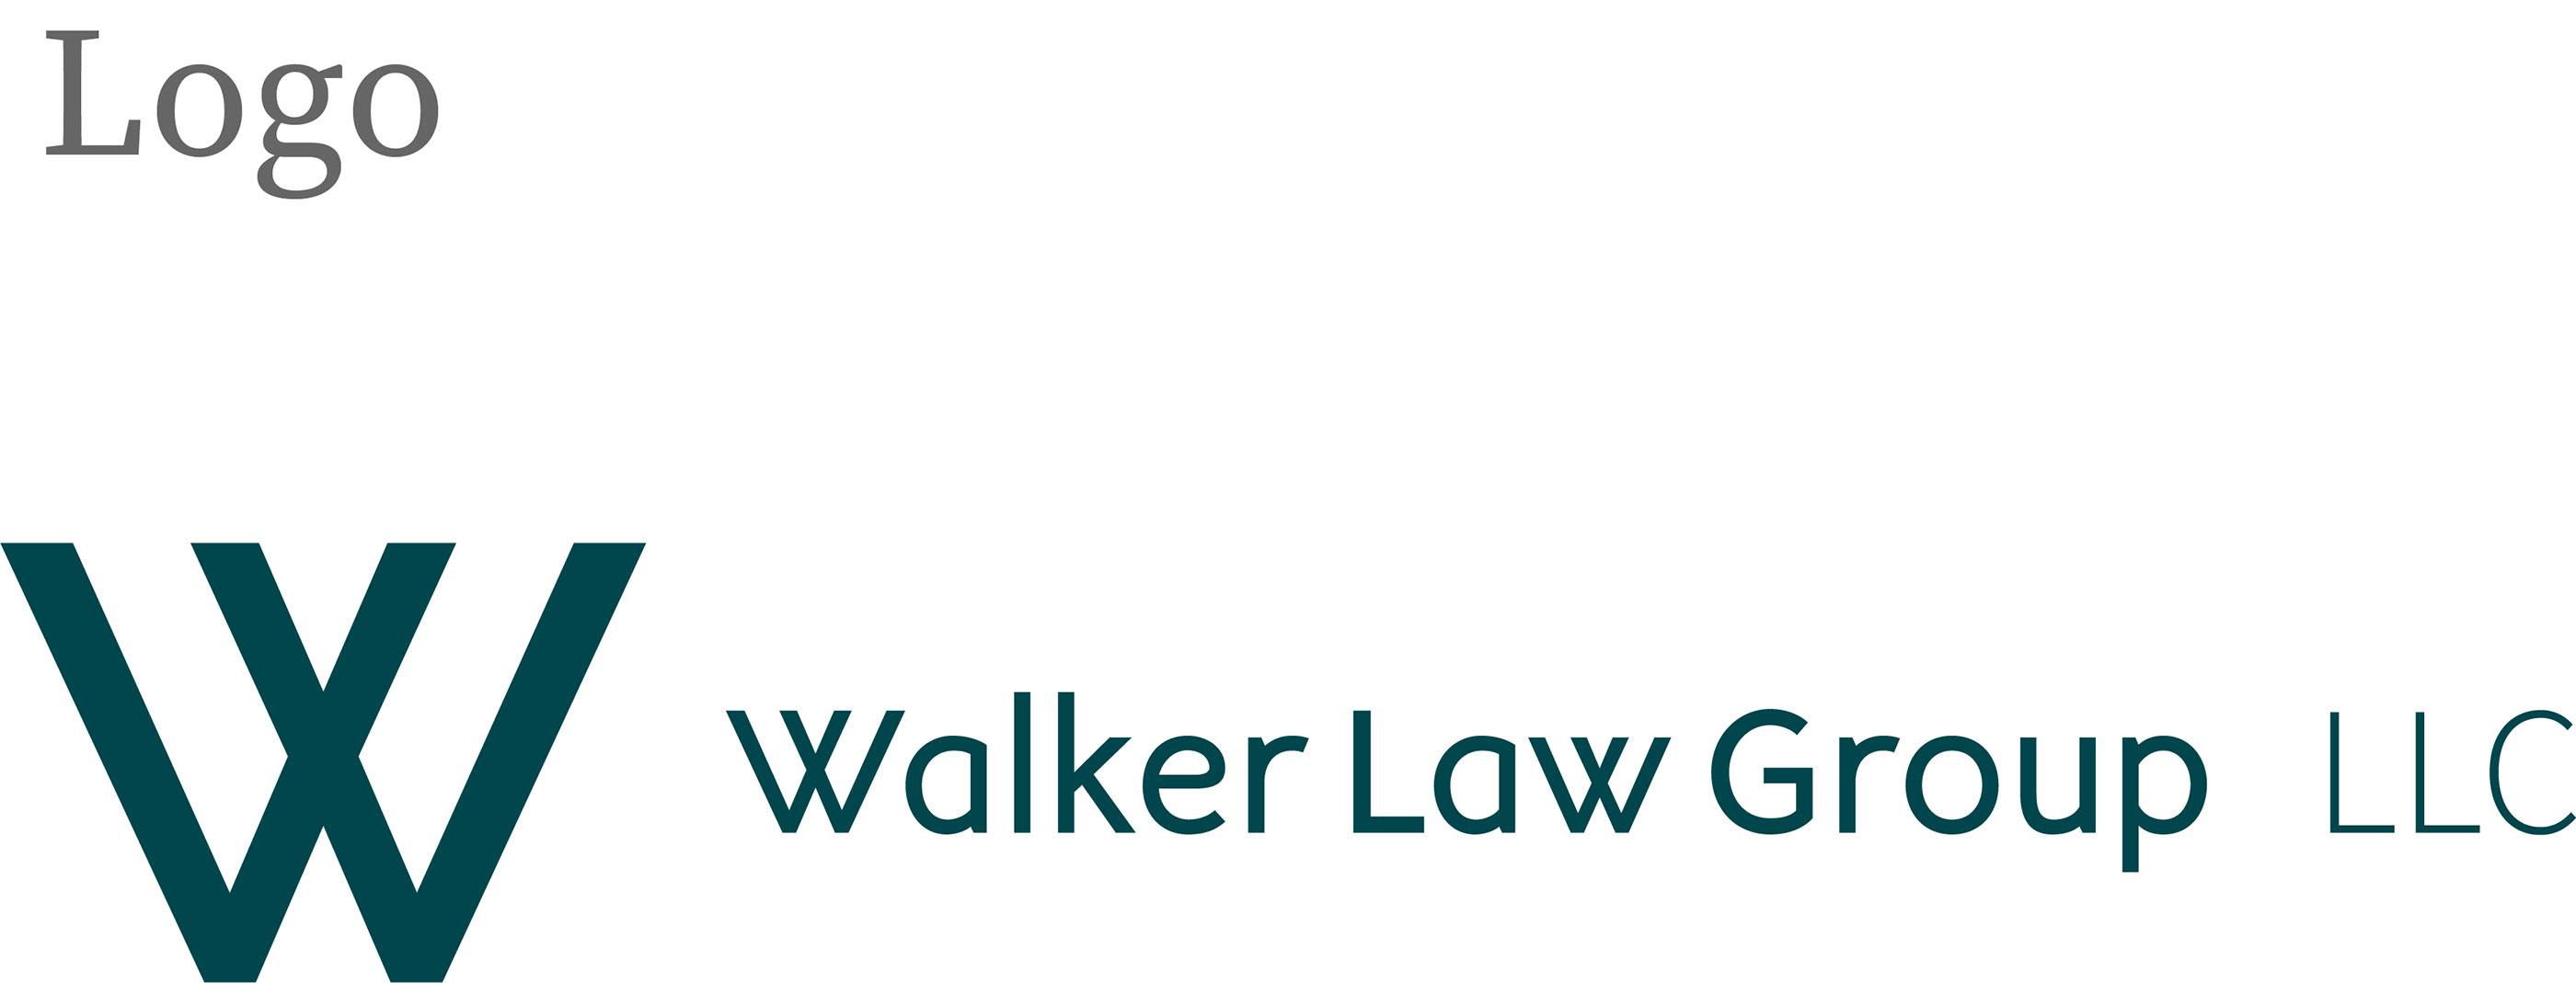 My client Walker Law Group LLC is a litigation boutique specialized in comp...